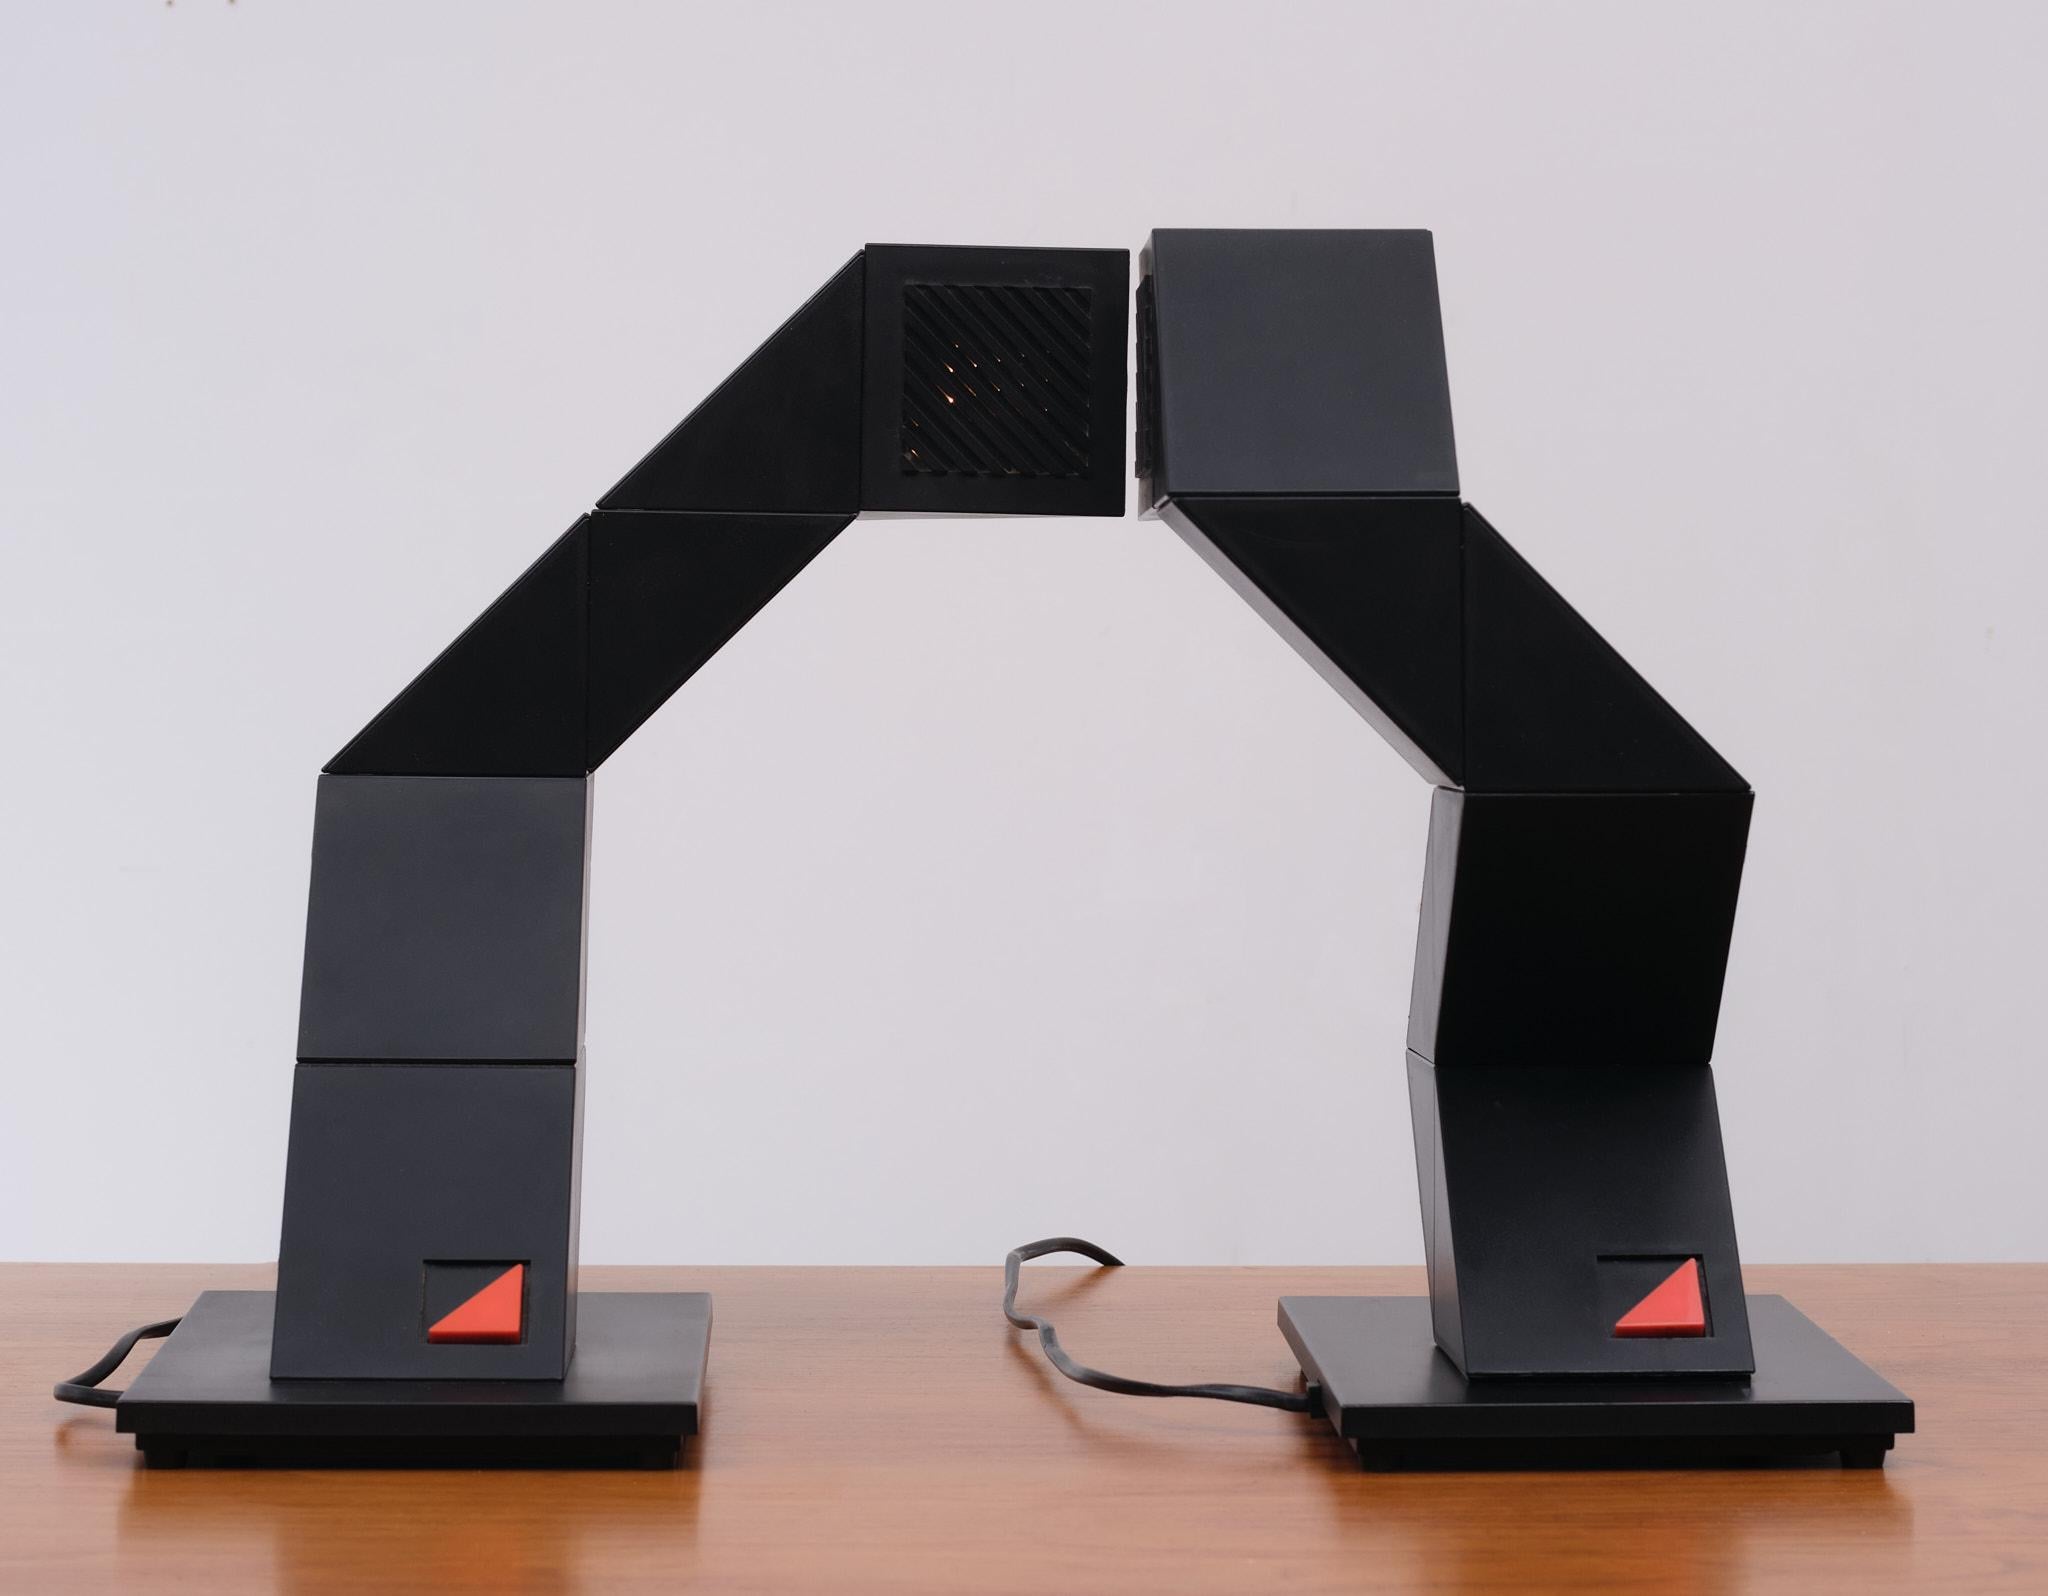 Looking for something special .What about this wonderful set of table lamps. square black plastic 
made in segments. each segment is turn-able 16 different positions each. Designer: Shui L. D. Chan in 1984.
Manufacturer: New Horizons Product